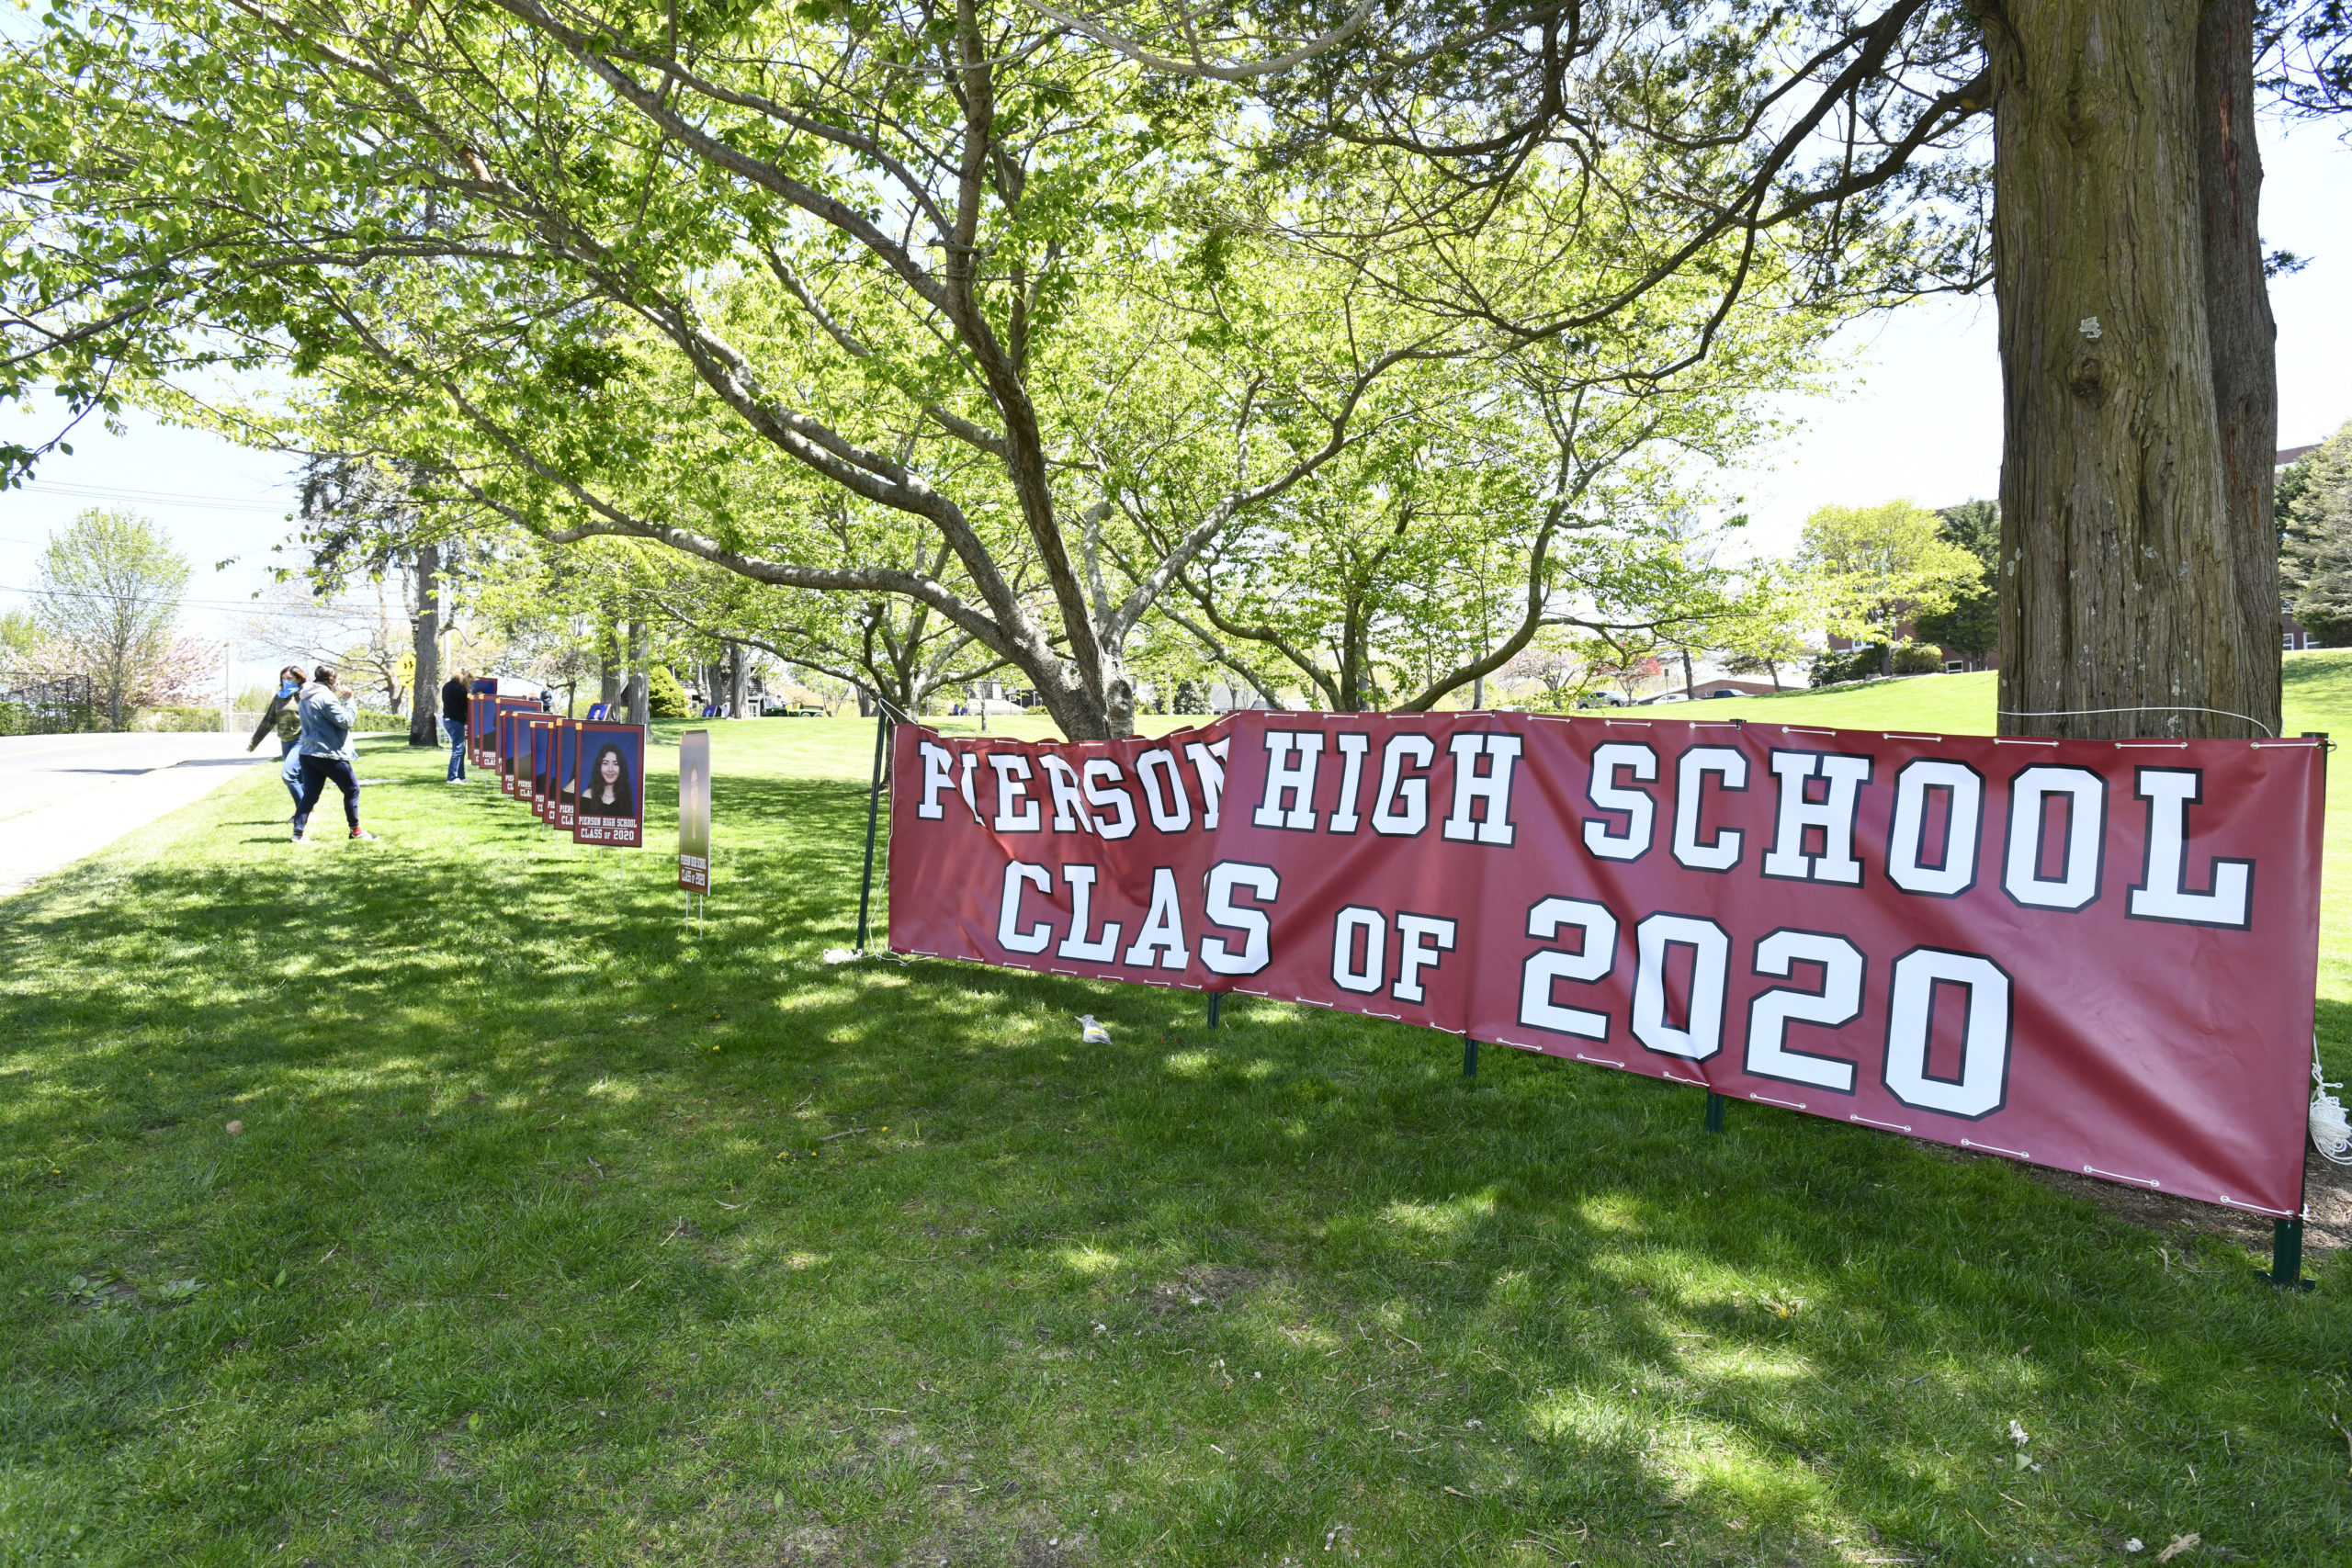 Photos of the Pierson High School Class or 2020 went up on Pierson Hill on Wednesday.